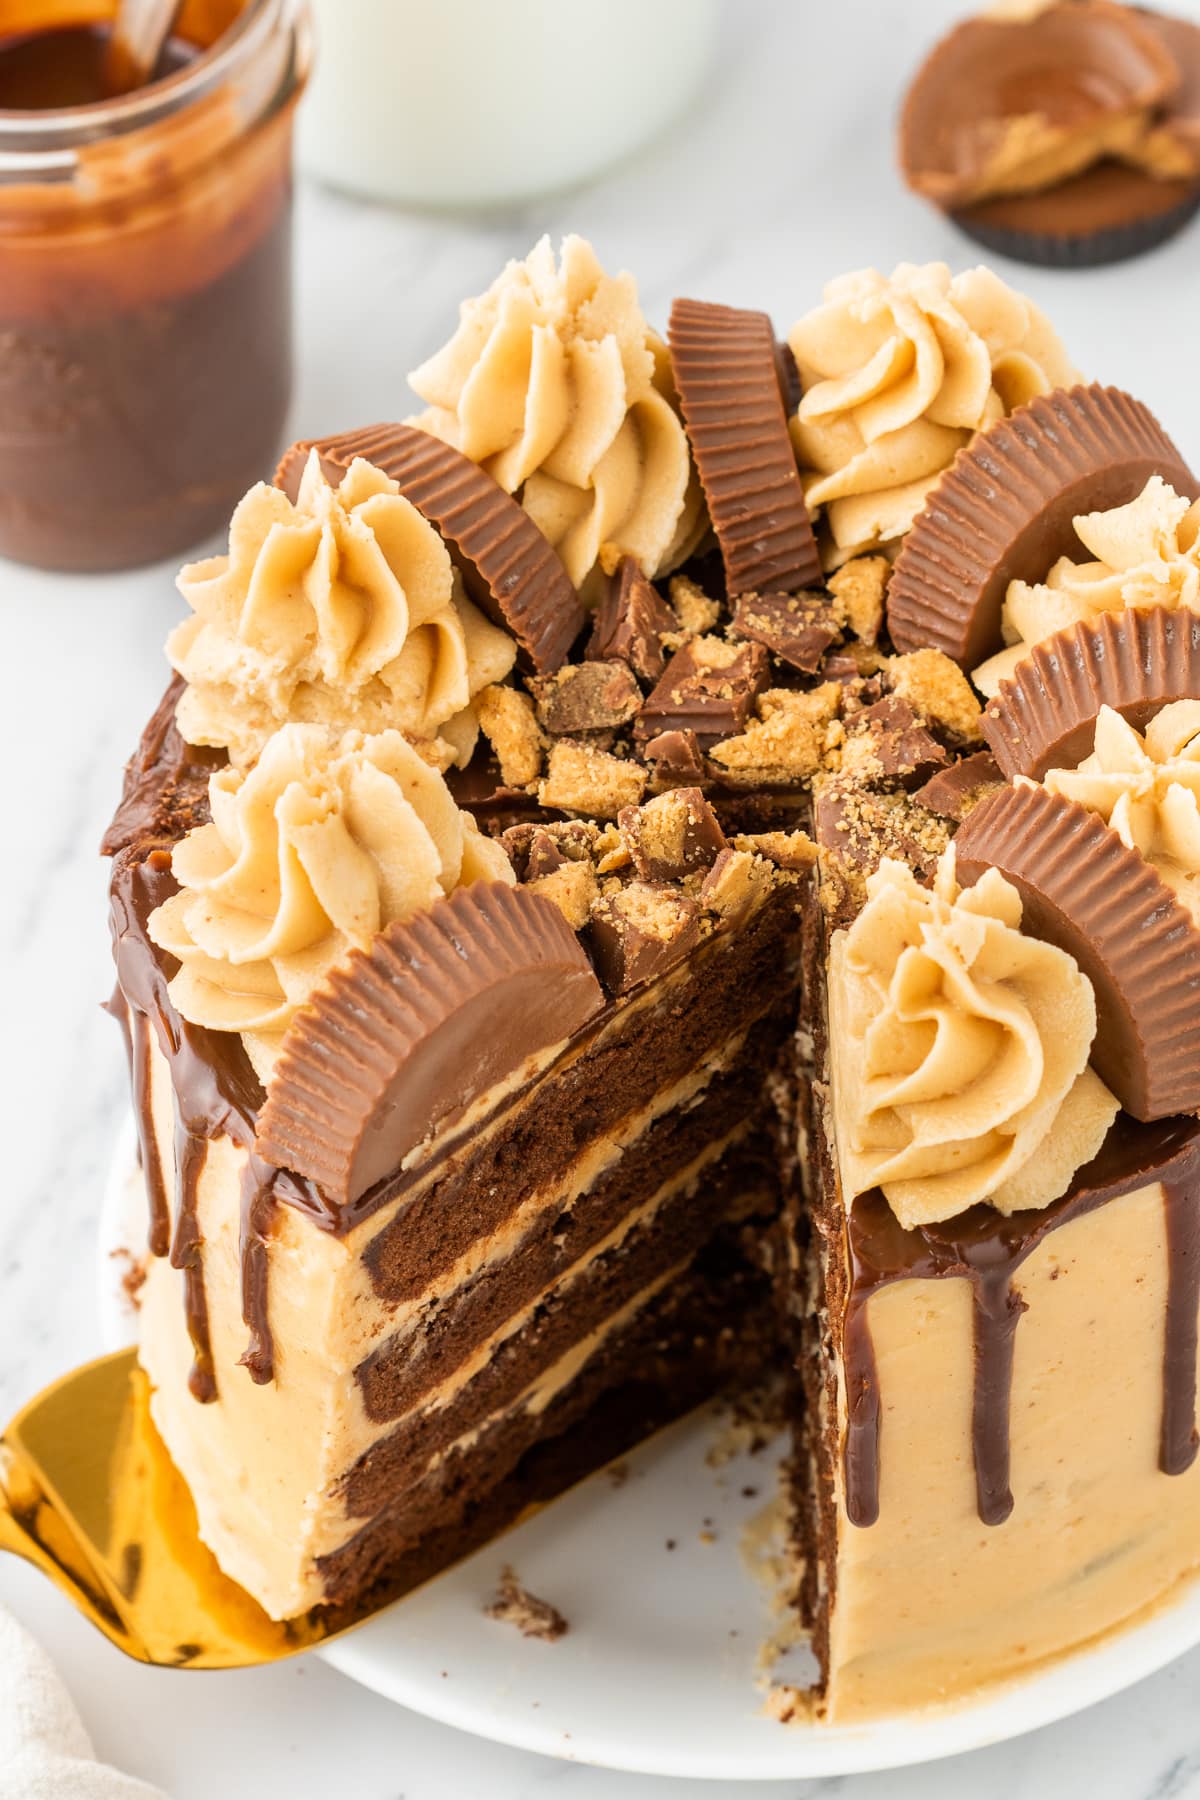 chocolate cake layered with ganache, peanut butter frosting, and peanut butter cups on top on a white plate